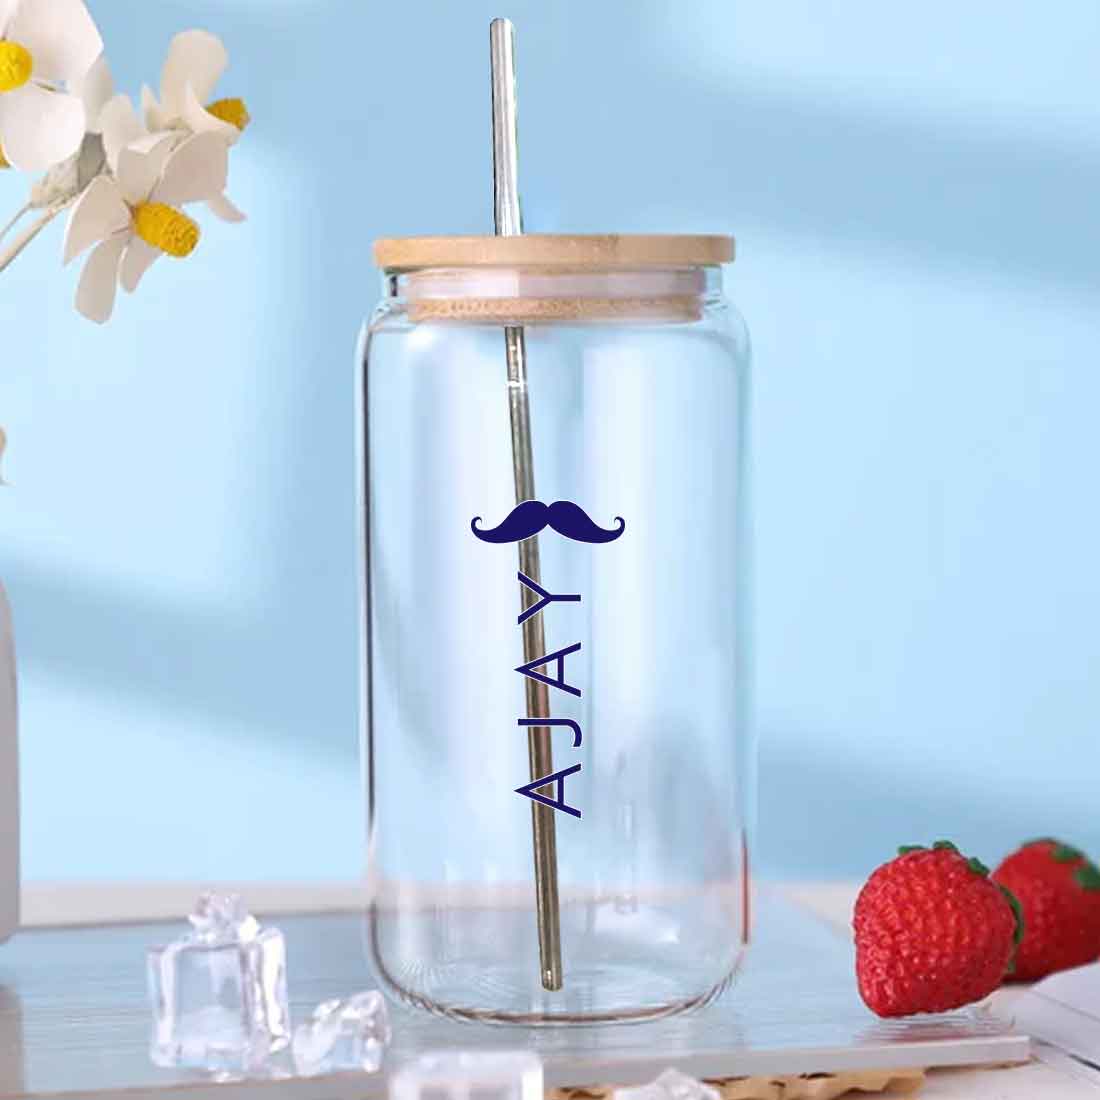 Nutcase Custom Can Shaped Glass with Metal Straw and Wooden Lid